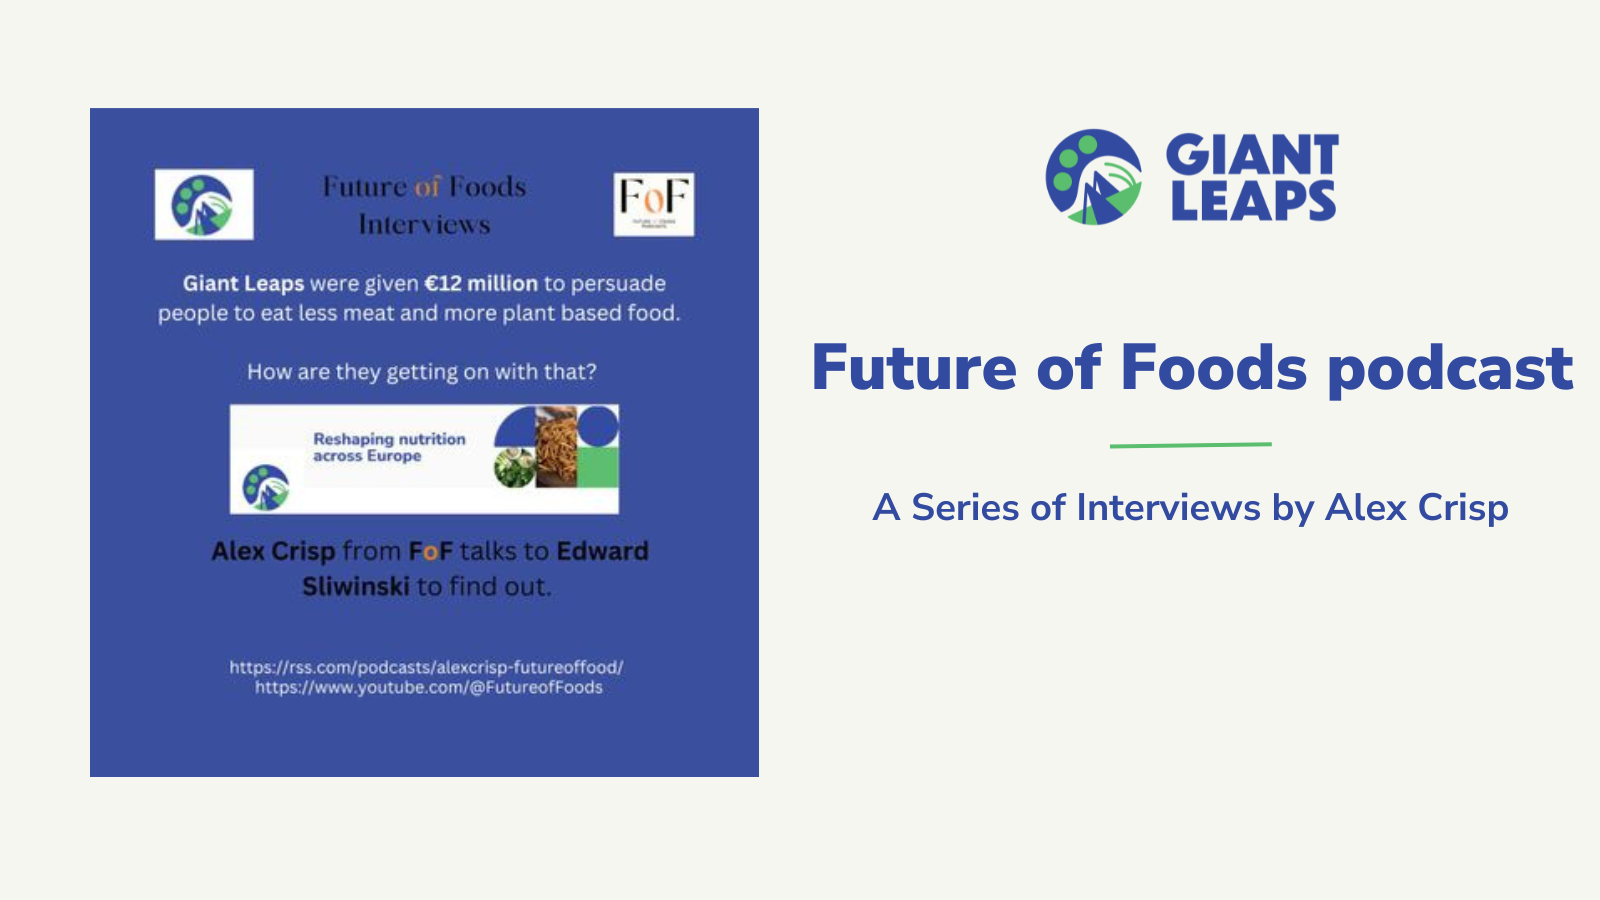 Giant Leaps in Future of Foods podcast 